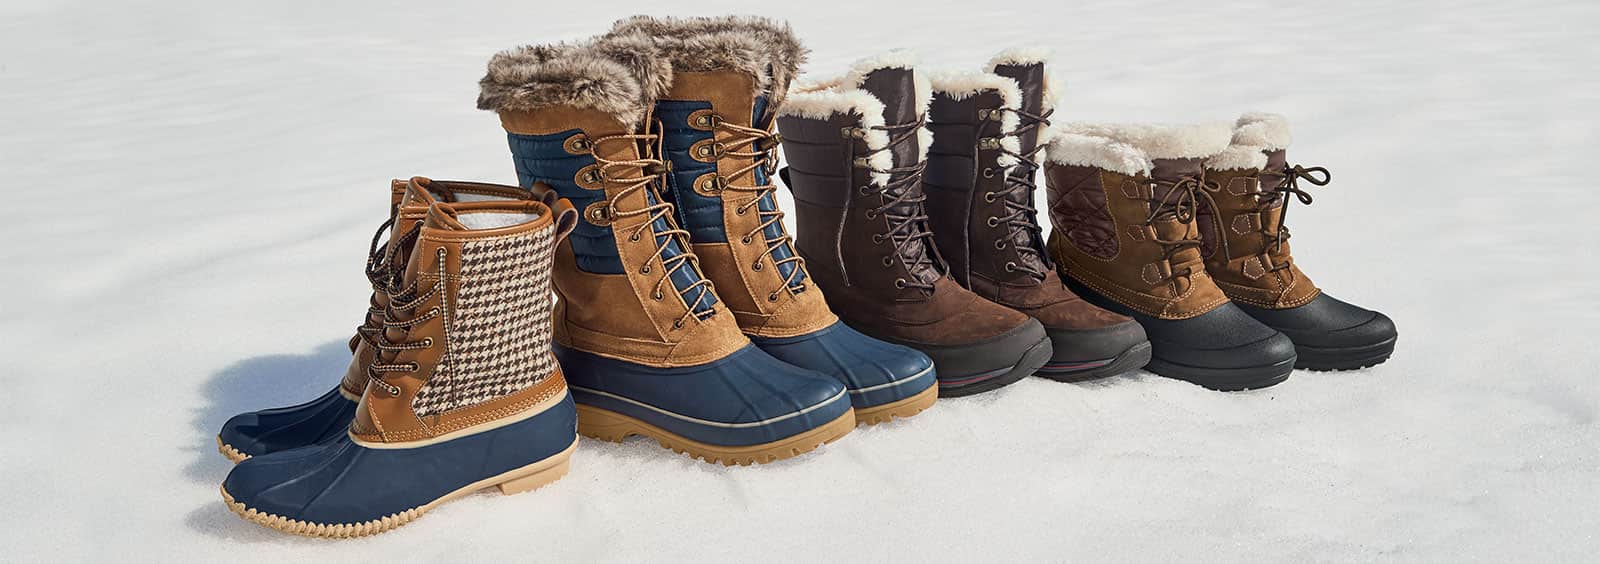 Best Women's Boots to Travel With This Winter